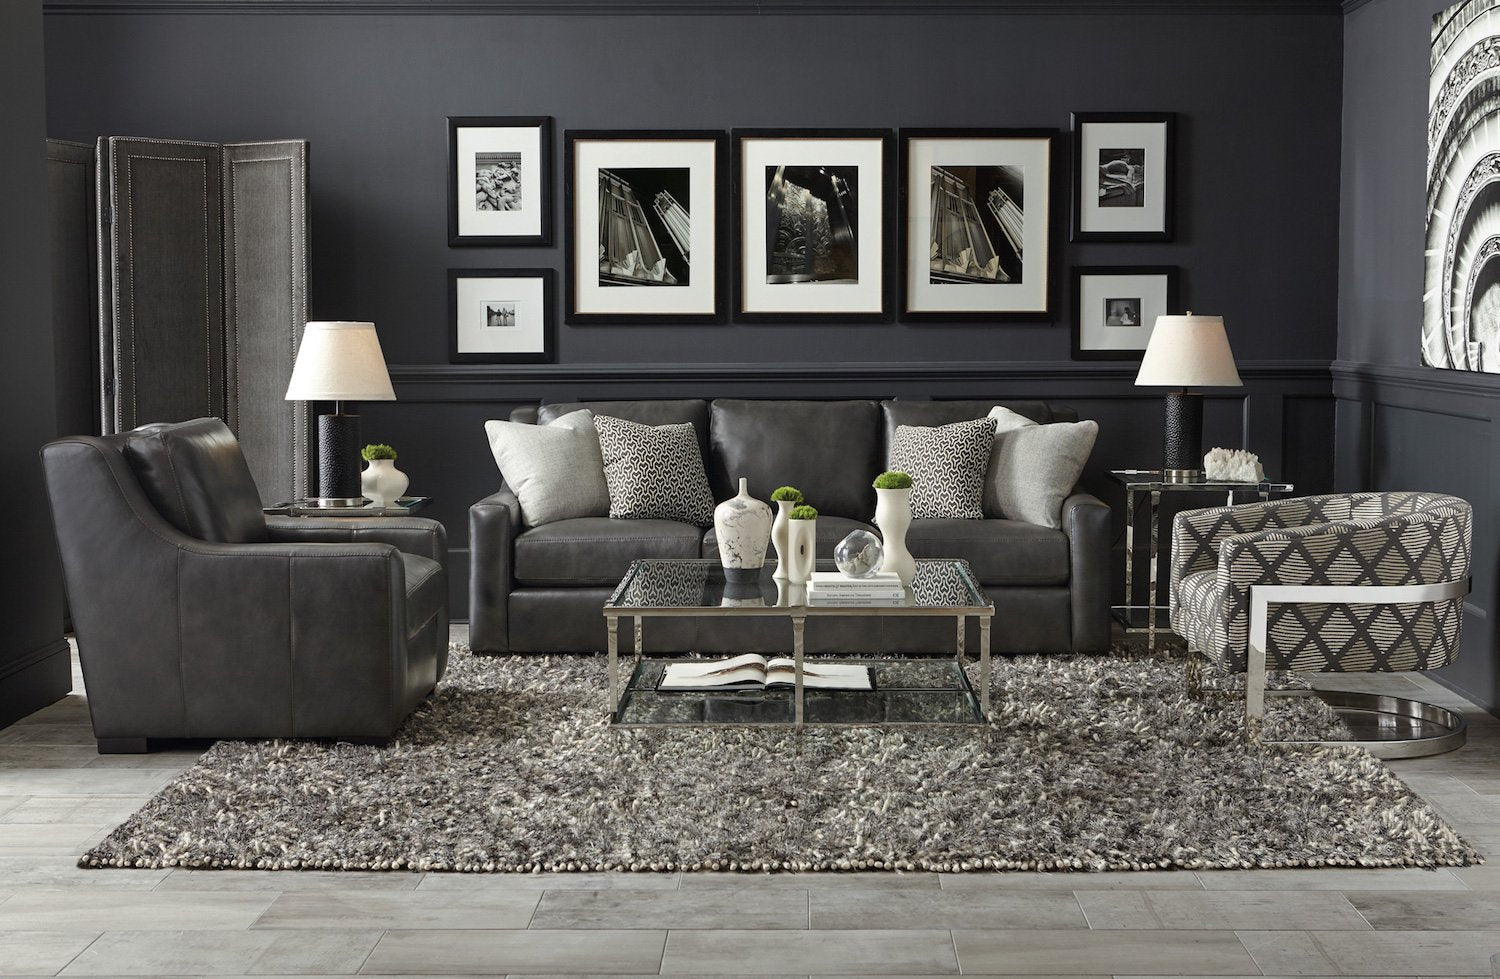 Surrounded by Color: How to Create A Stunning Monochrome Room